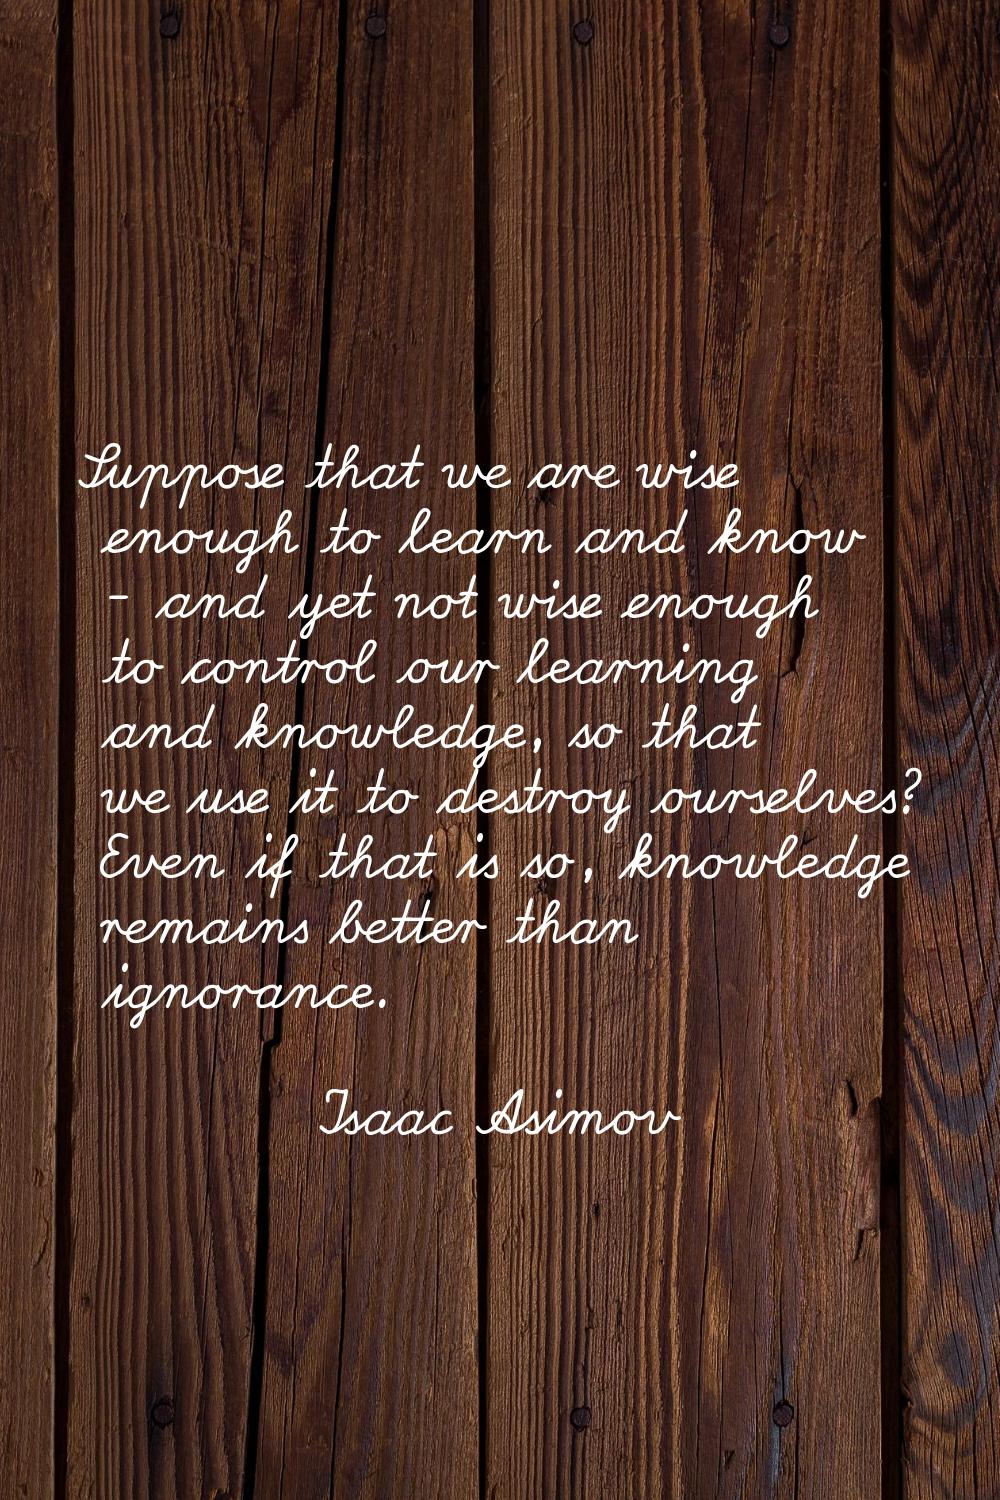 Suppose that we are wise enough to learn and know - and yet not wise enough to control our learning